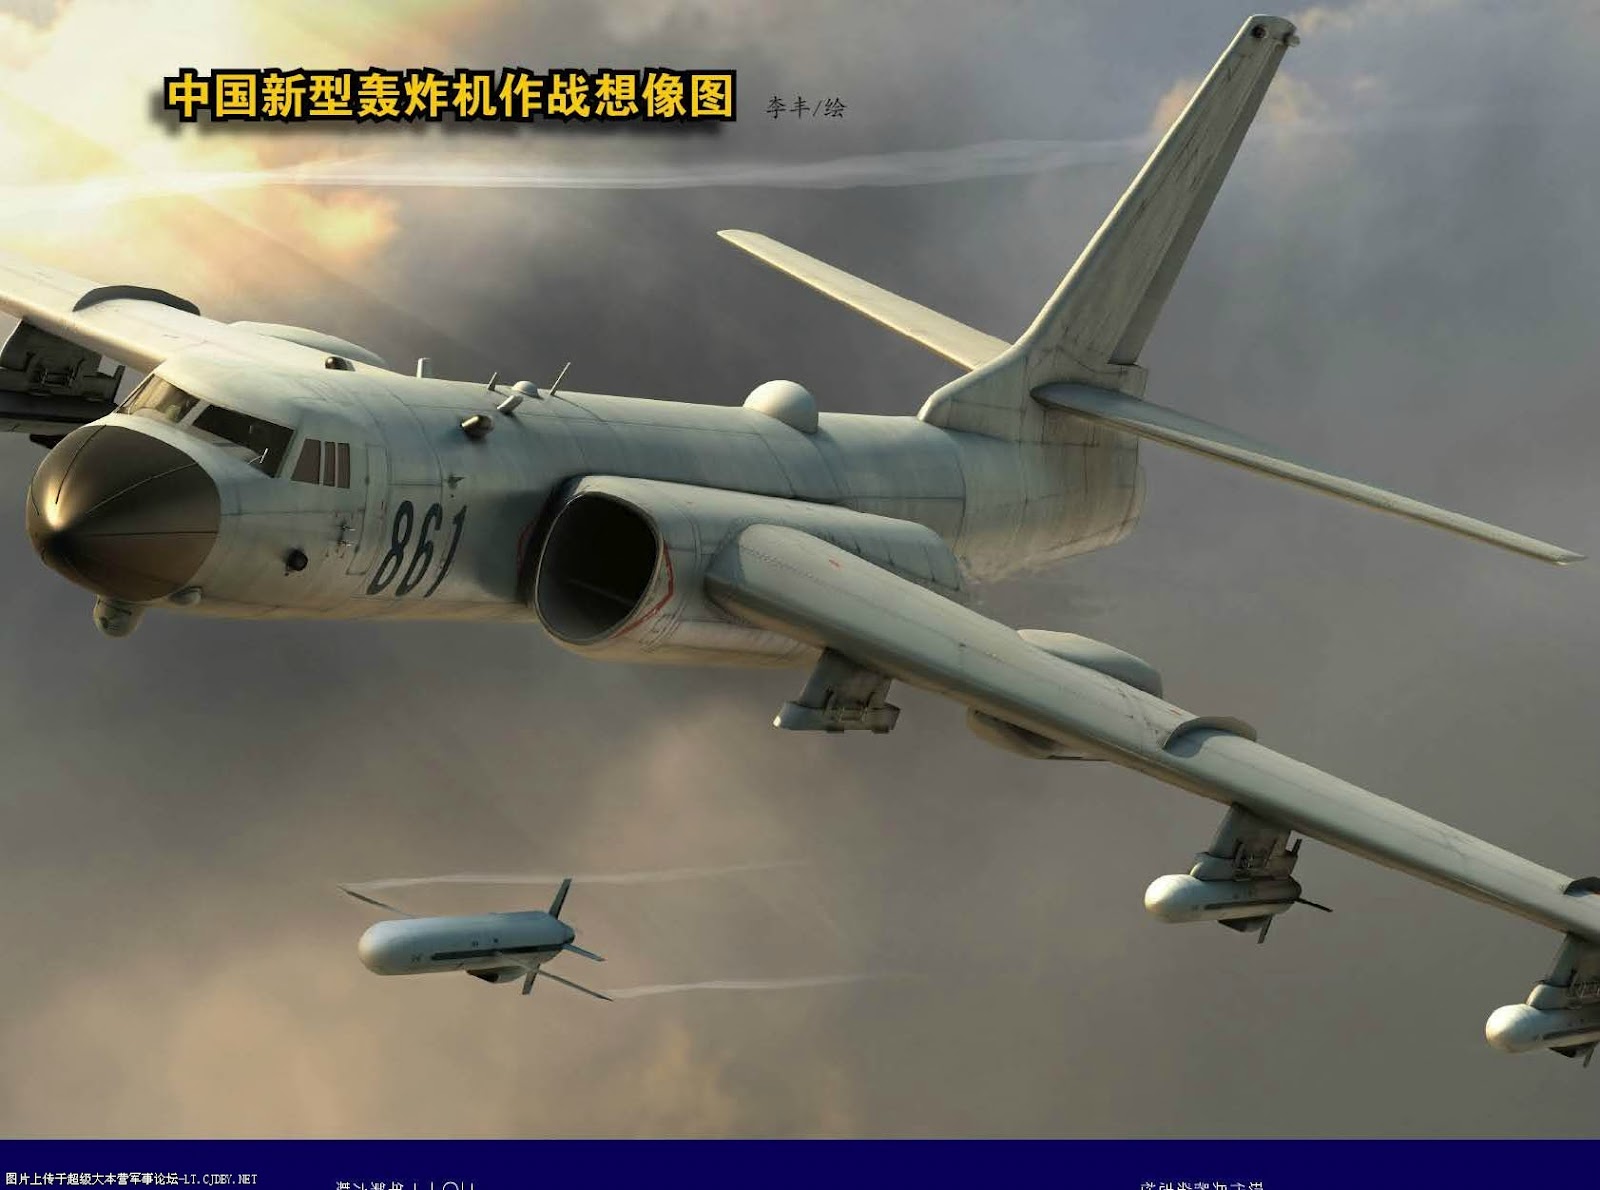 xian+H-6K+abcdefghkmu+Chinese+People's+Liberation+Army+Air+Force+Tupolev+Tu-16+Badger+antiship+missile+pgm+ls-6+lt-2+3+cj-10+land+attack+cruise+missile+antiship.jpg